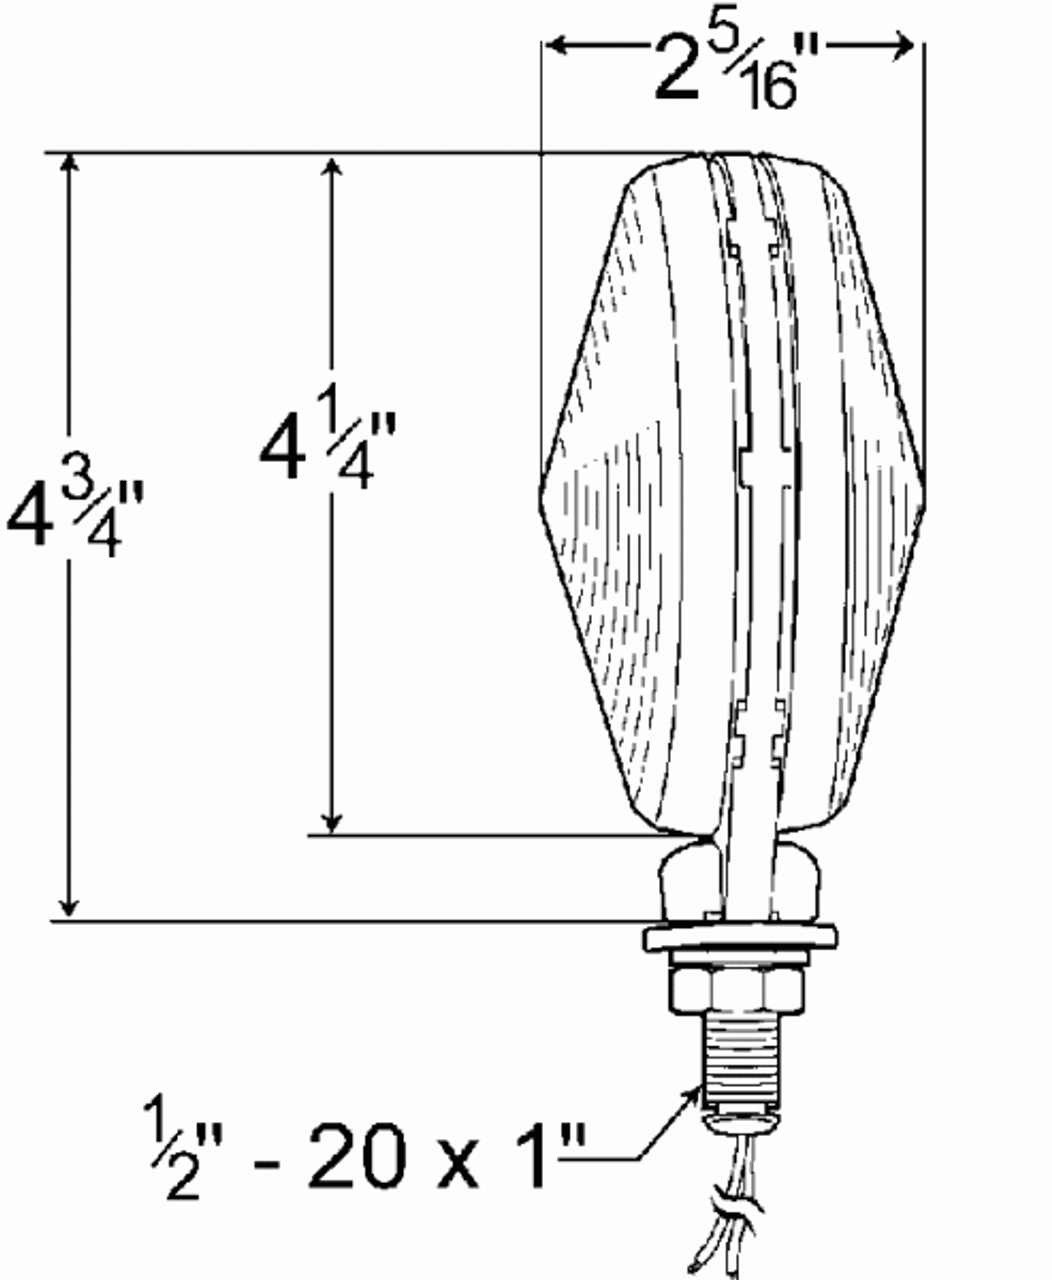 Grote 50642 4" Round Pedestal Lamp- Single Face- Red- Single Post-Dual Wire- Incandescent